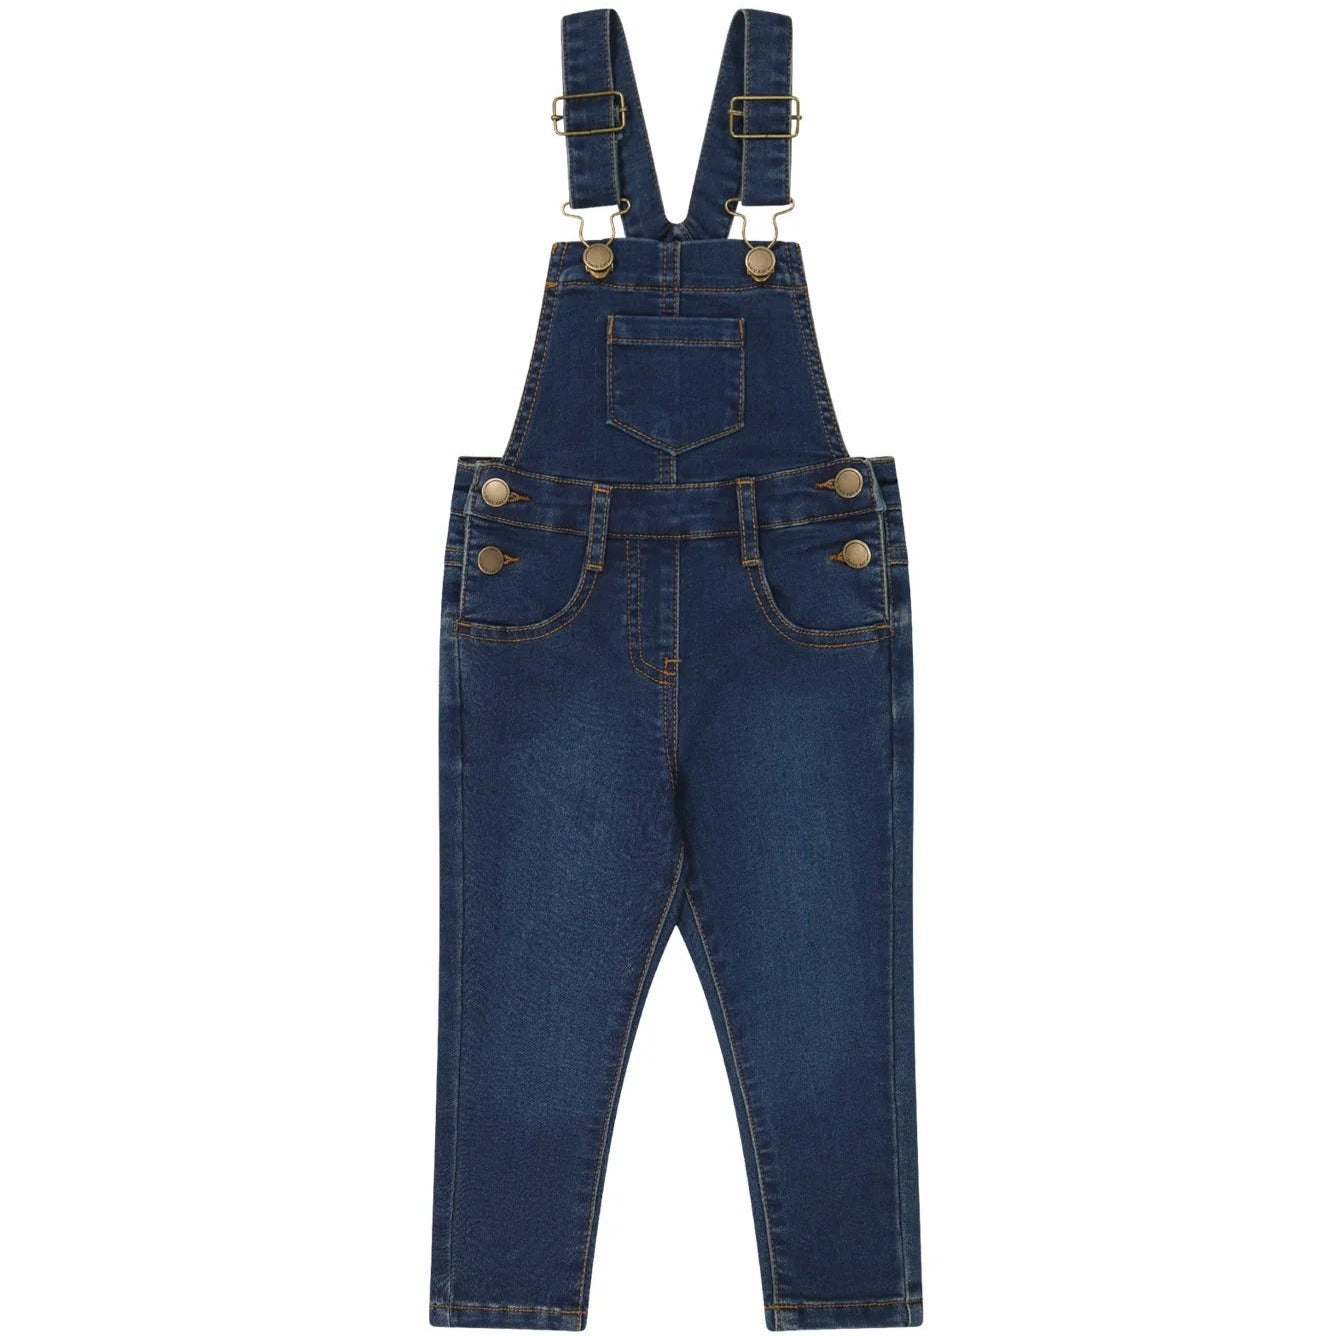 denim overall - angus and dudley